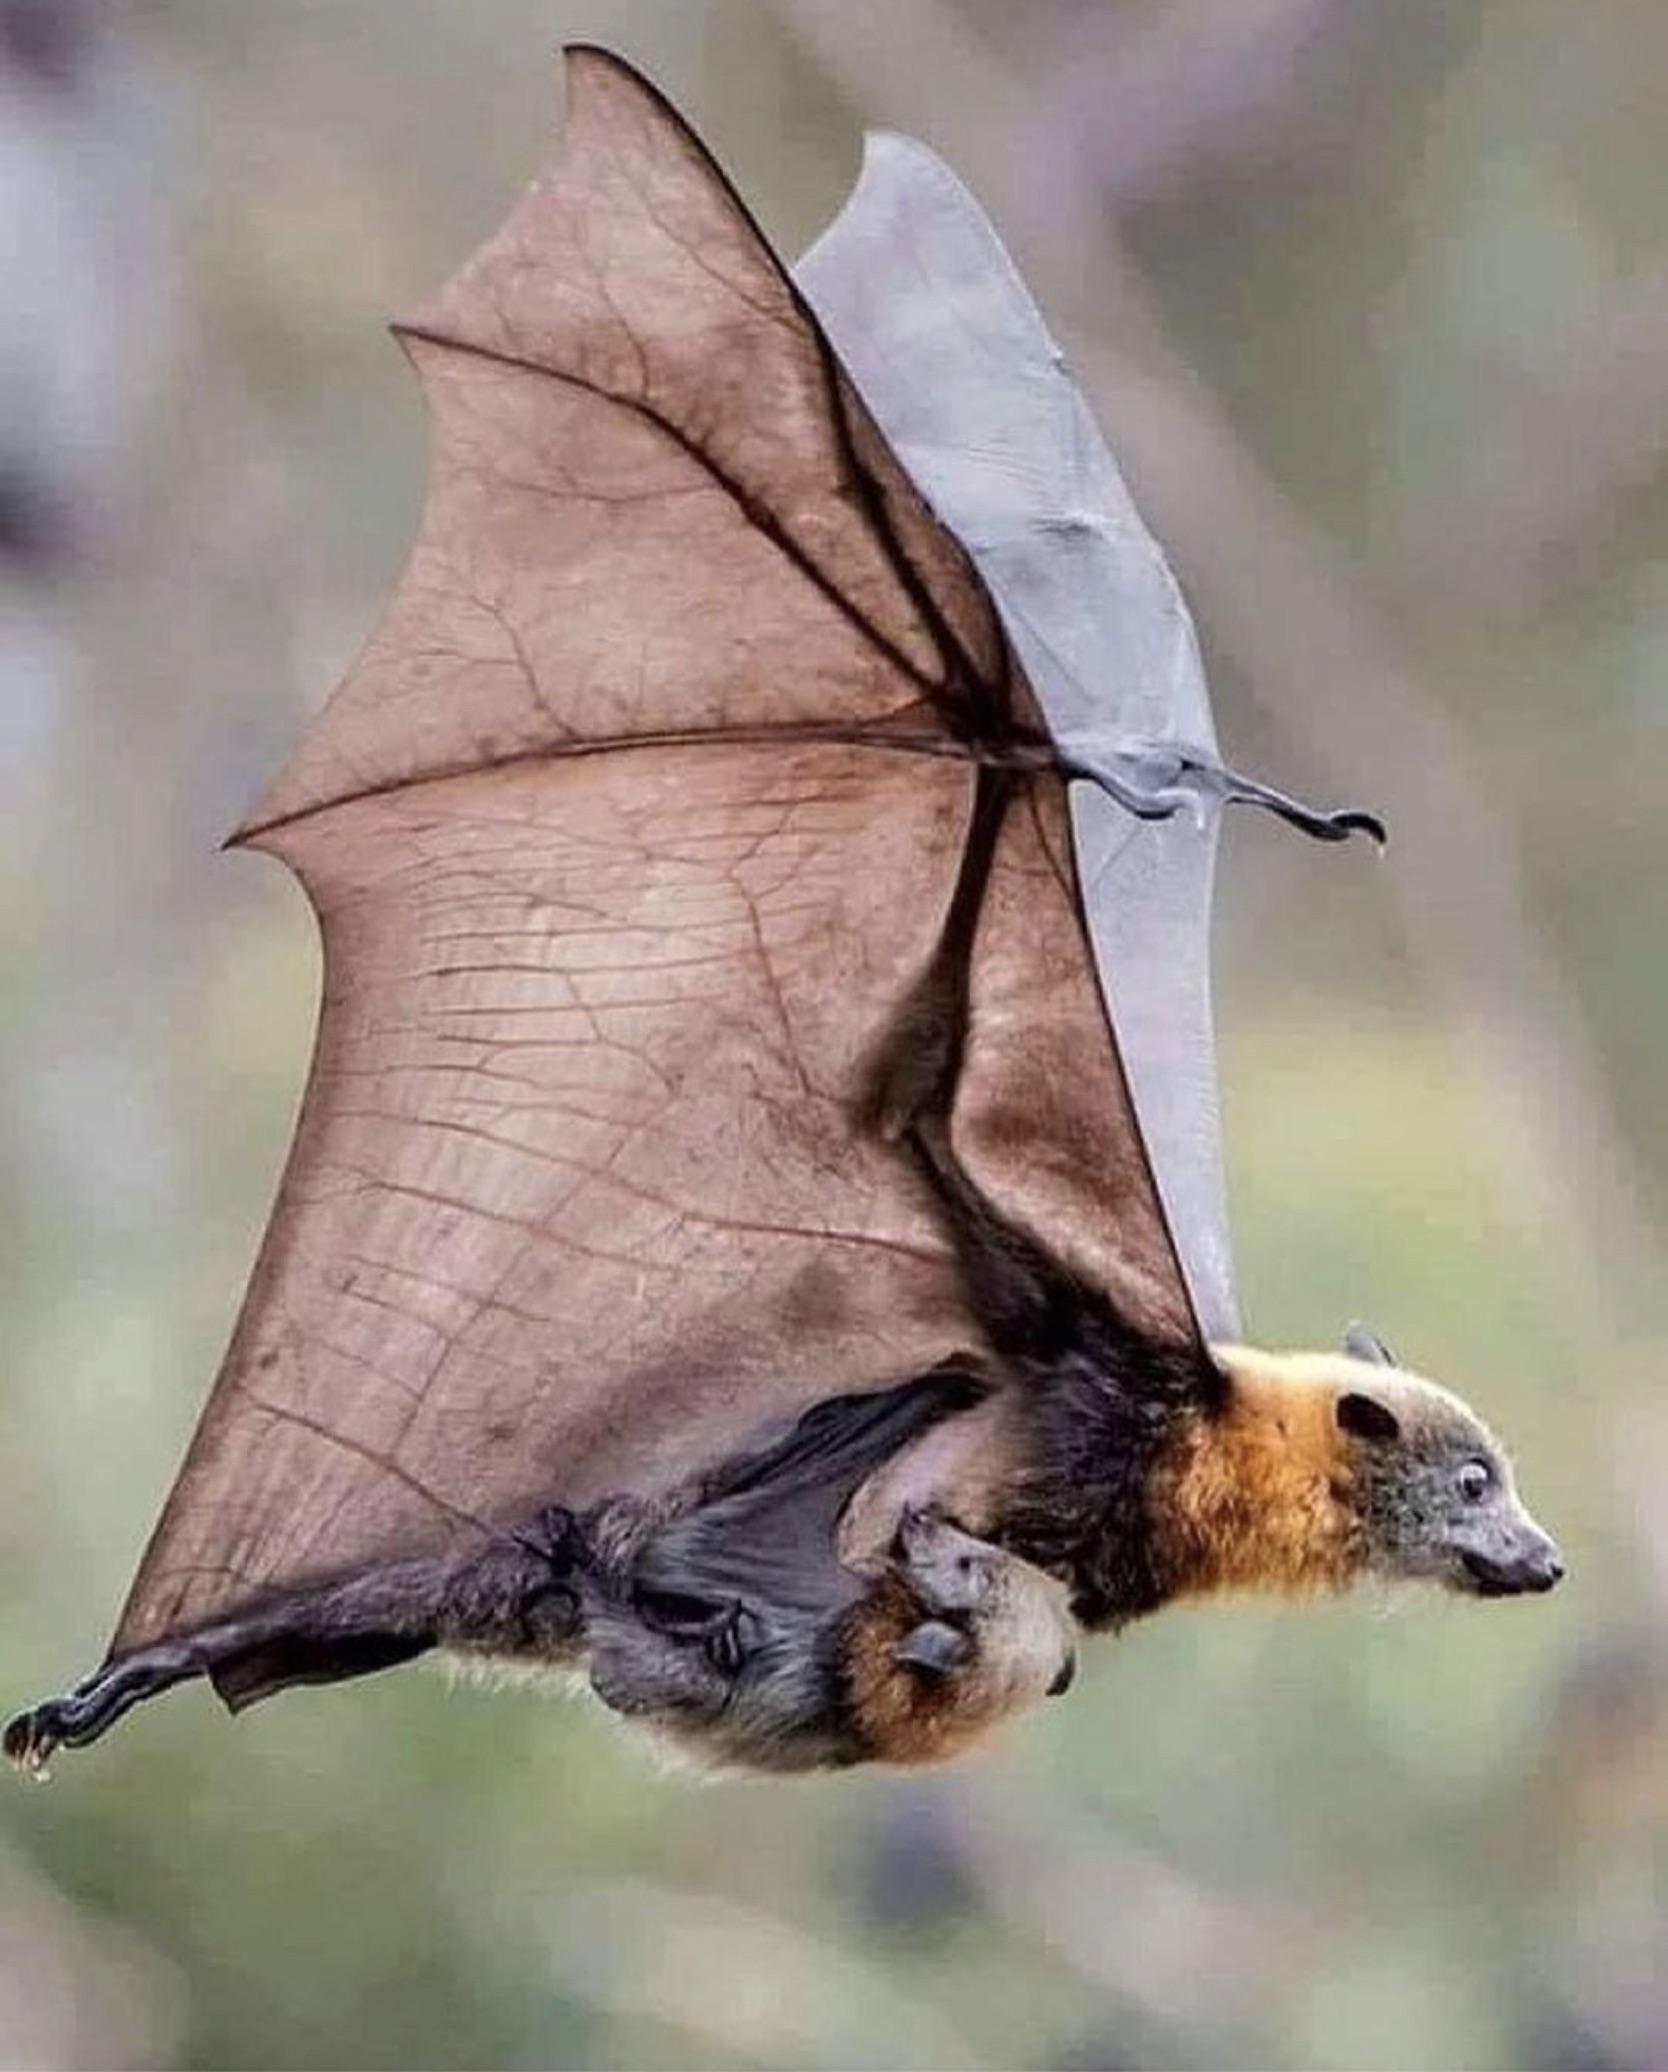 Mother+bat+with+its+baby